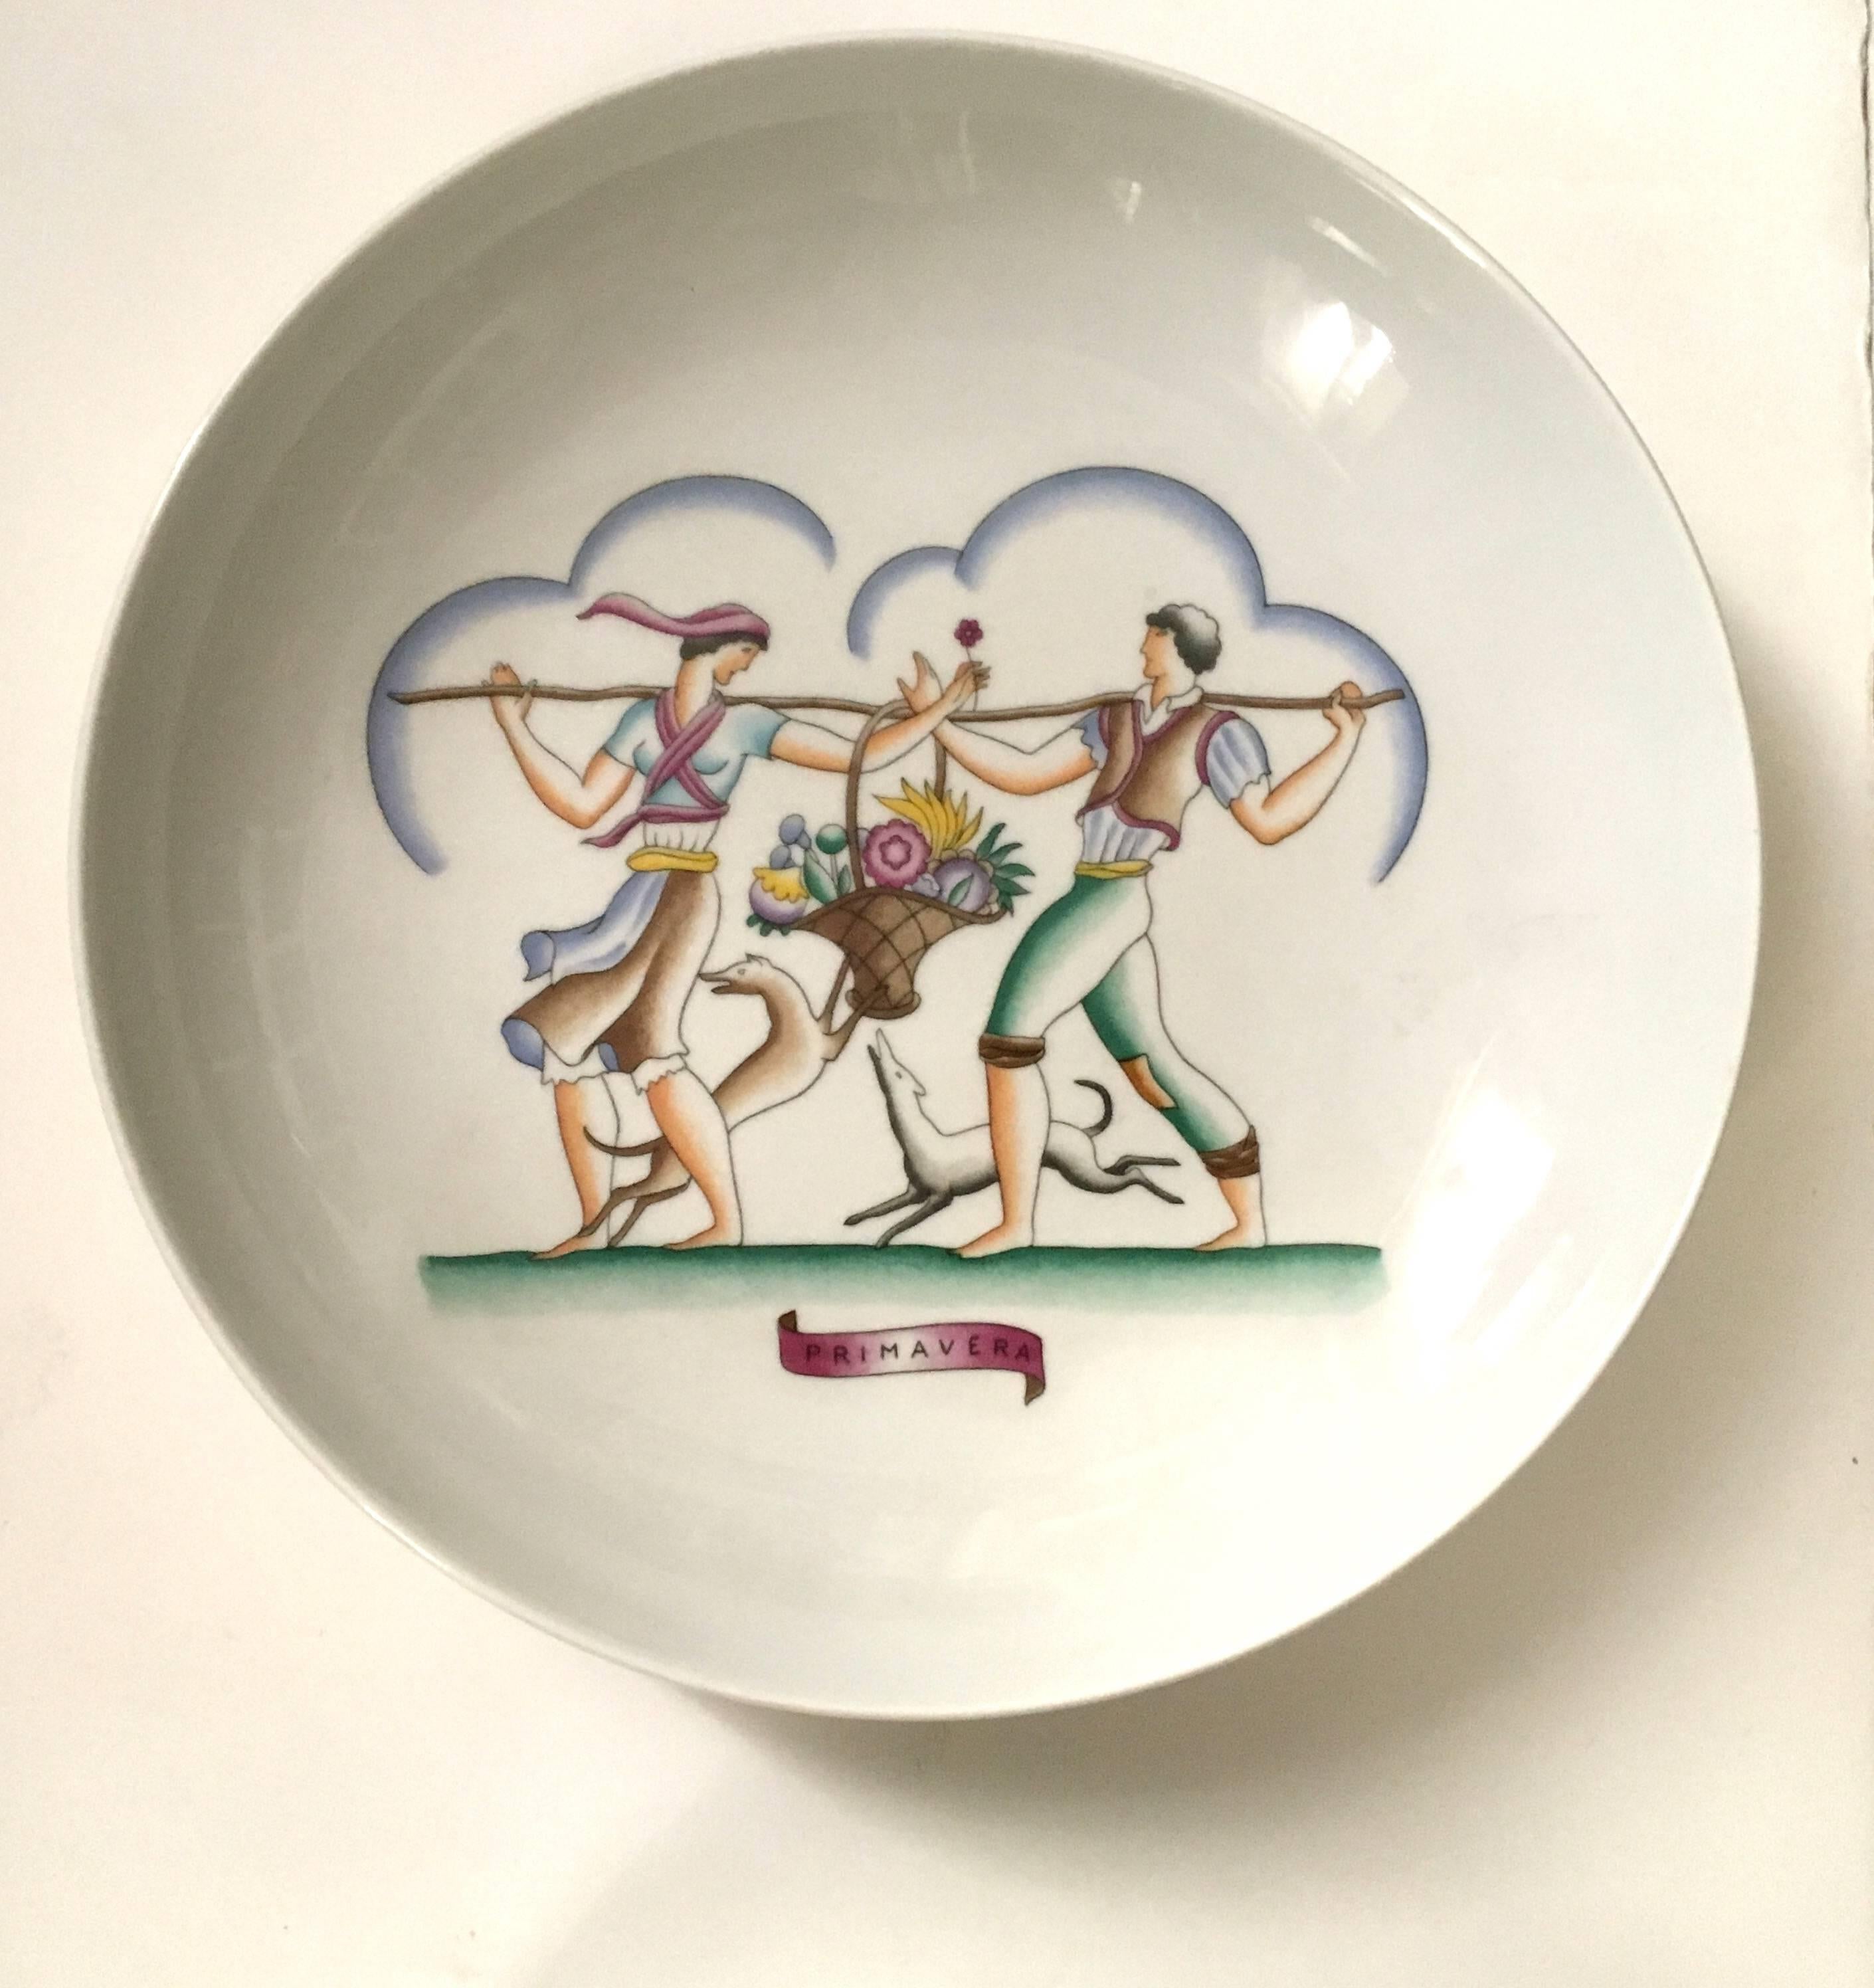 Gio Ponti for Richard Ginori limited edition of the four seasons porcelain plates. Primavera, Estate, Autunno, Inverno.
Bearing the mark factory stamp at the verso of each plate, Gio Ponti Richard Ginori, manifattura di Doccia Florence Italy and the